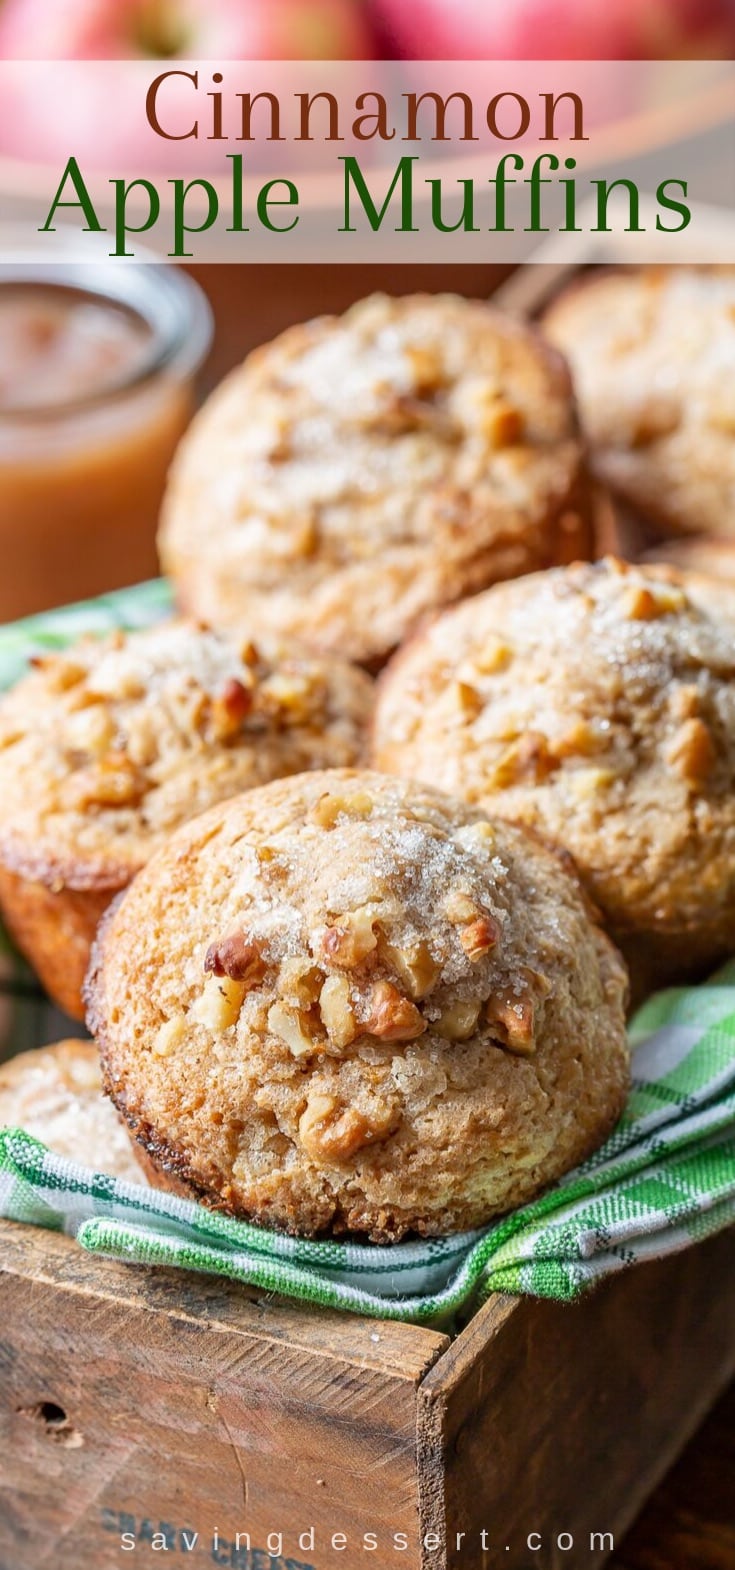 A box of cinnamon apple muffins topped with walnuts and coarse sugar